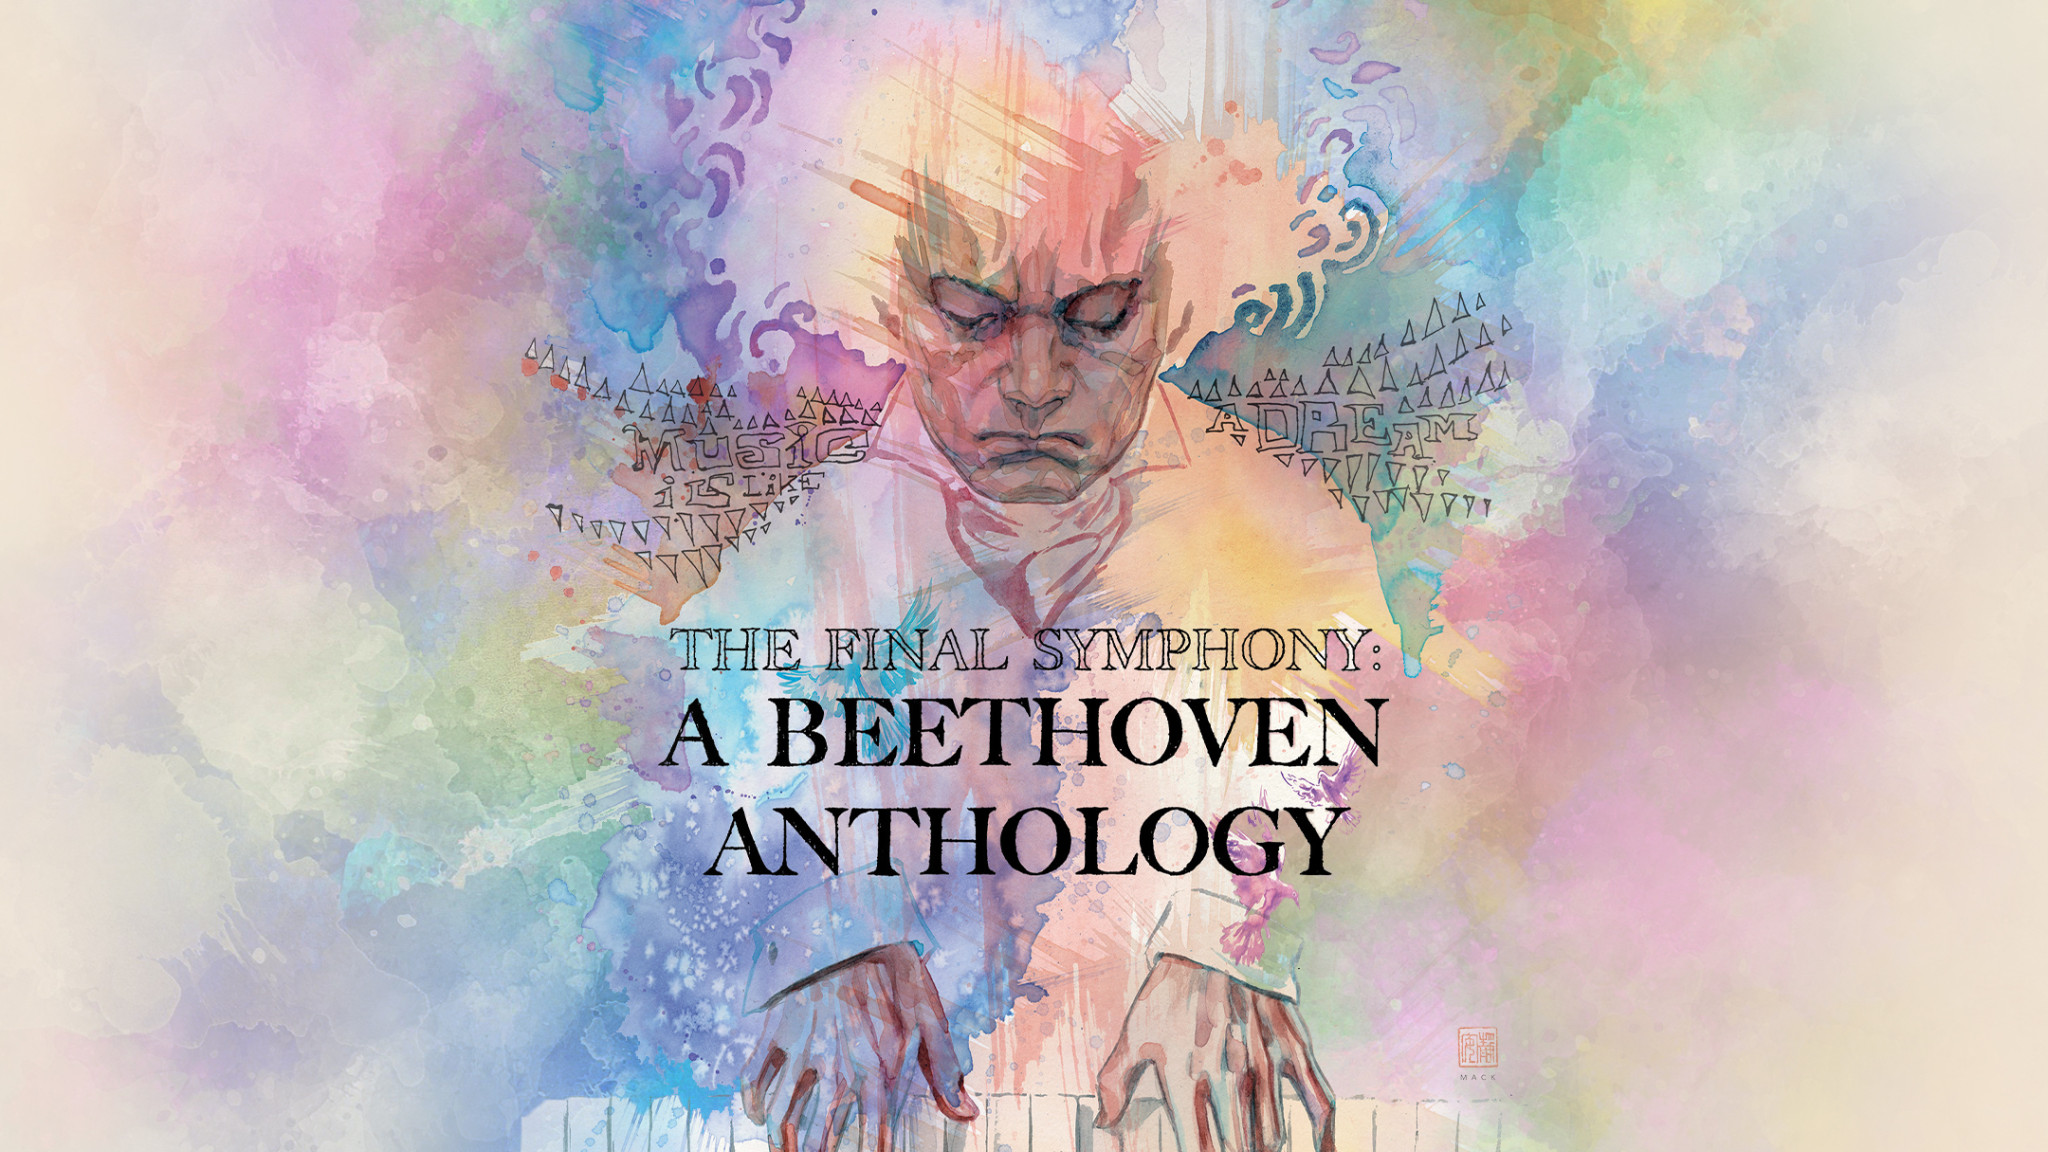 The life of Beethoven to be celebrated with original novel to mark 250th birthday